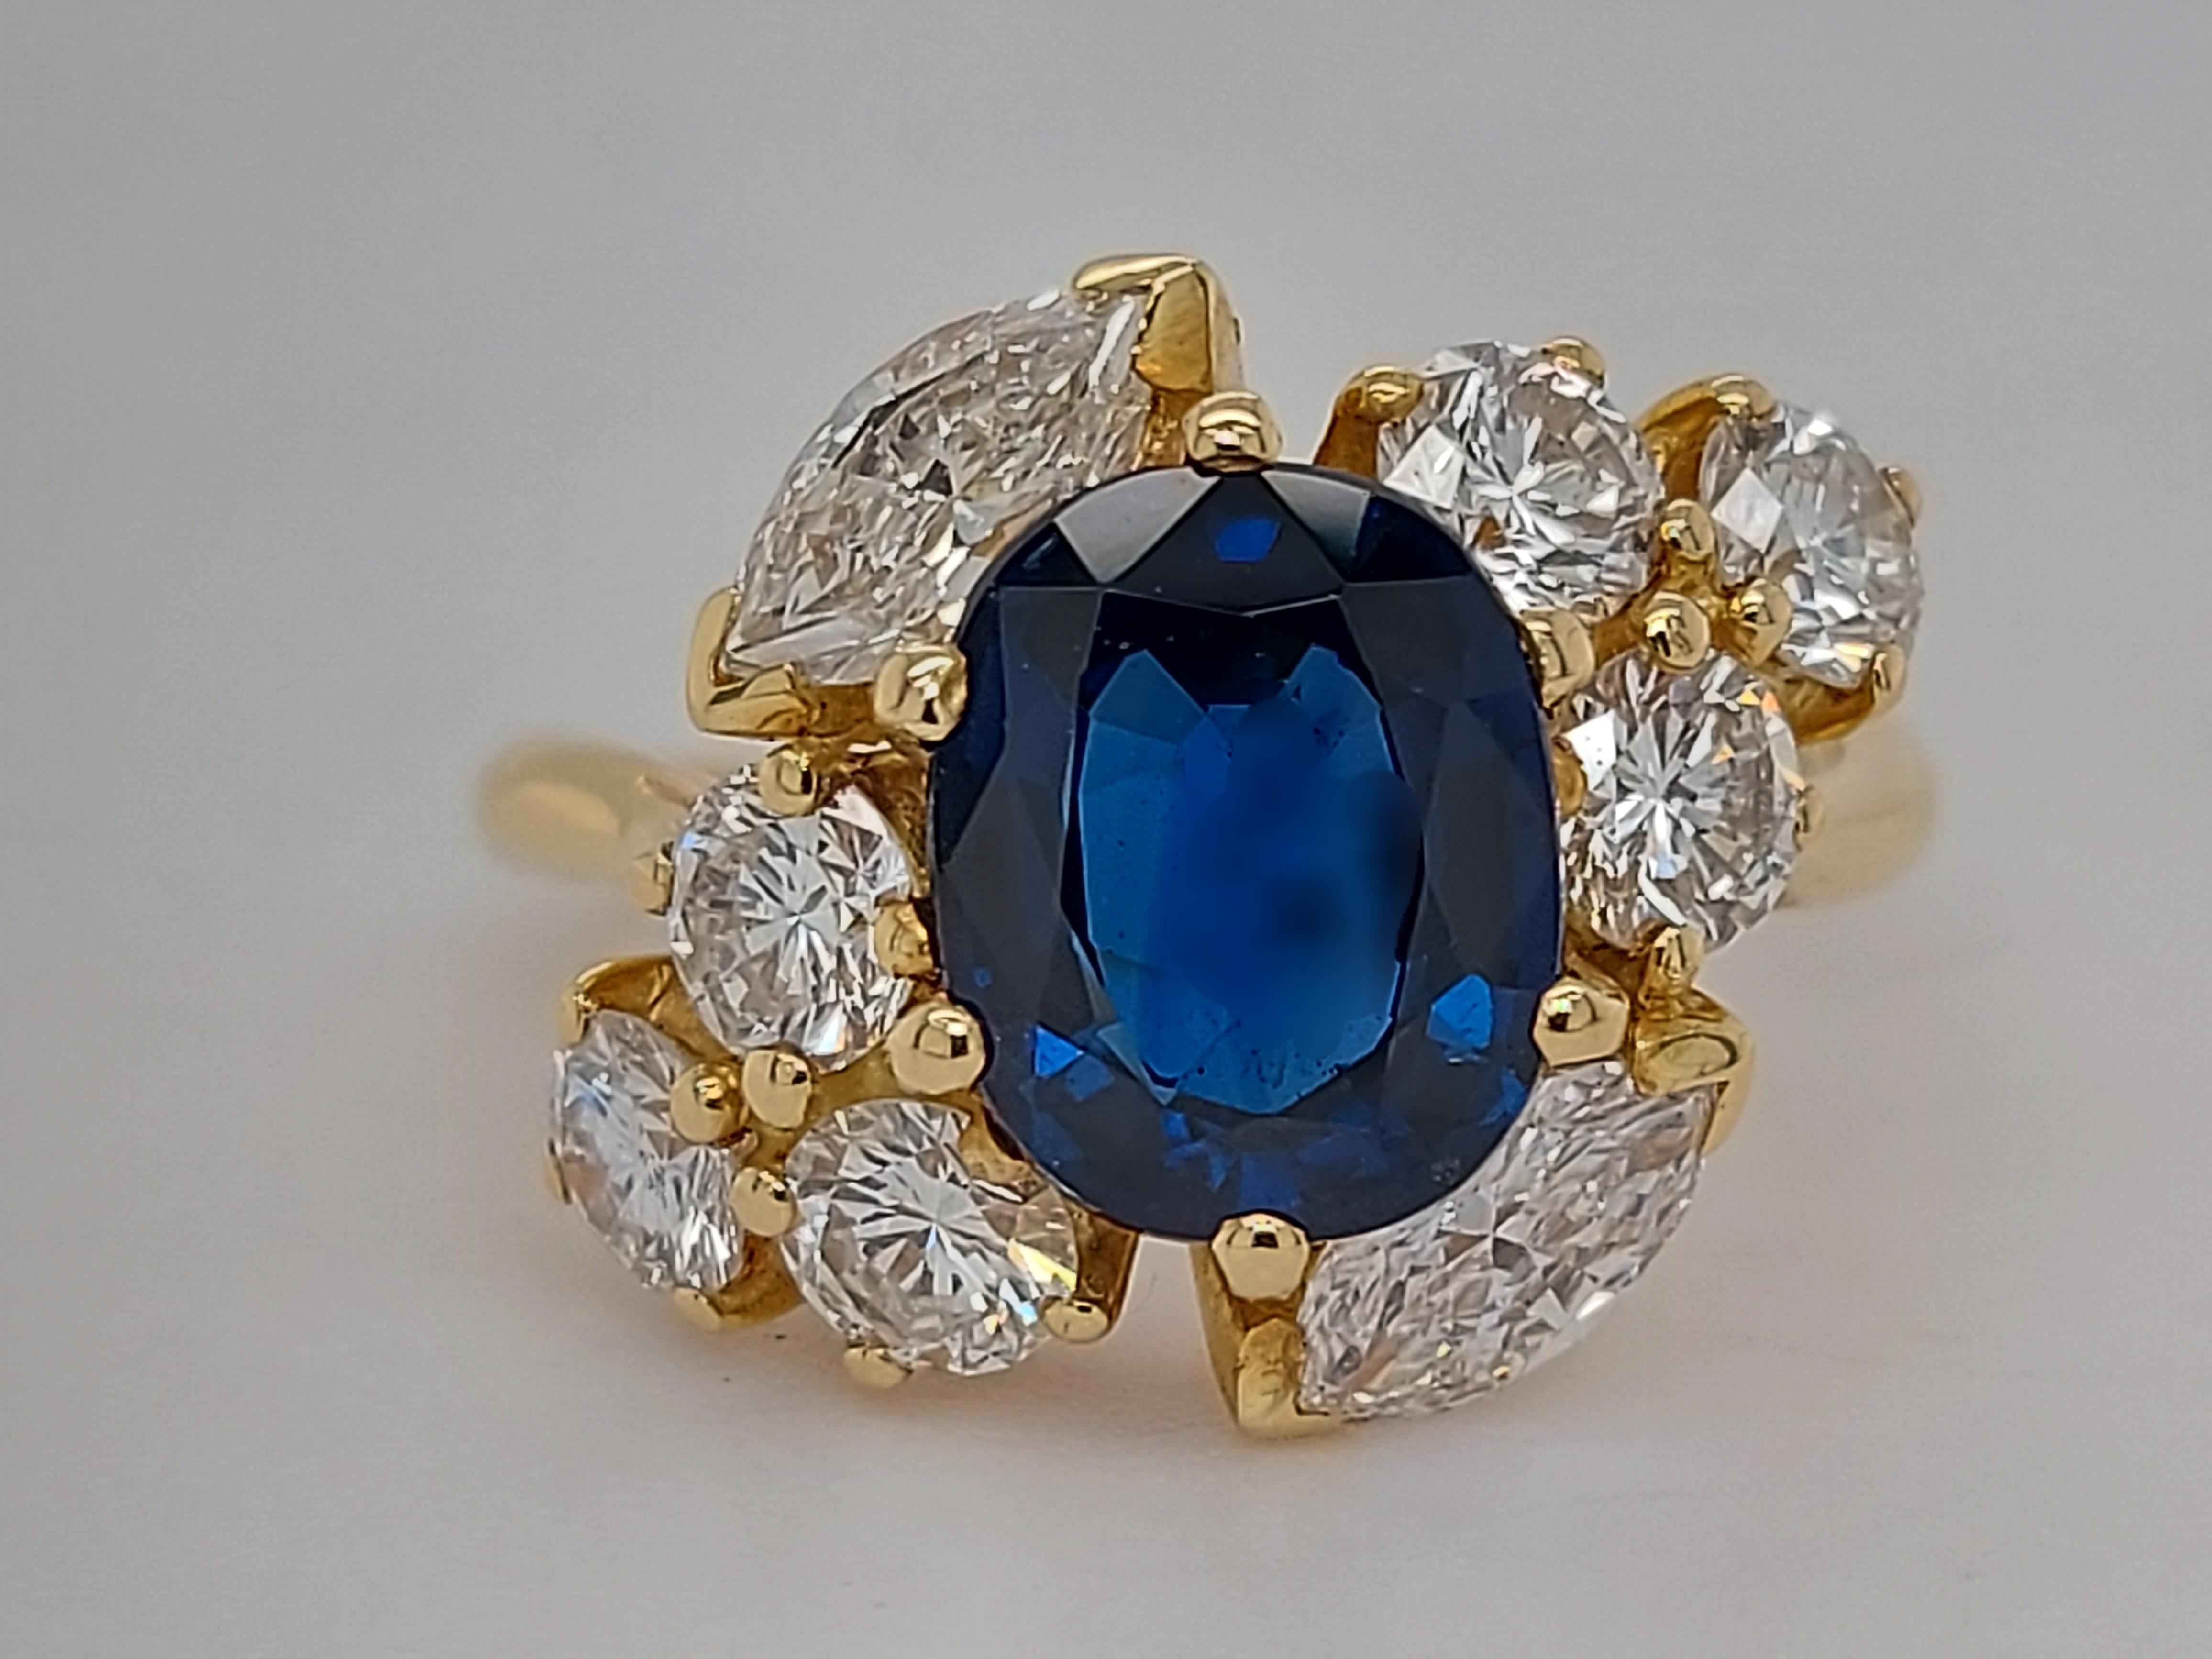 Stunning 18 kt Yellow Gold Ring With Oval Sapphire, Marquise & Round Cut Diamonds

Sapphire:  2.42 ct 

Diamonds: 2 Marquise and 6 round cut diamonds together approx 1,8 ct of beautiful color and clarity

Material: 18 kt yellow gold

Ring Size: 52 (